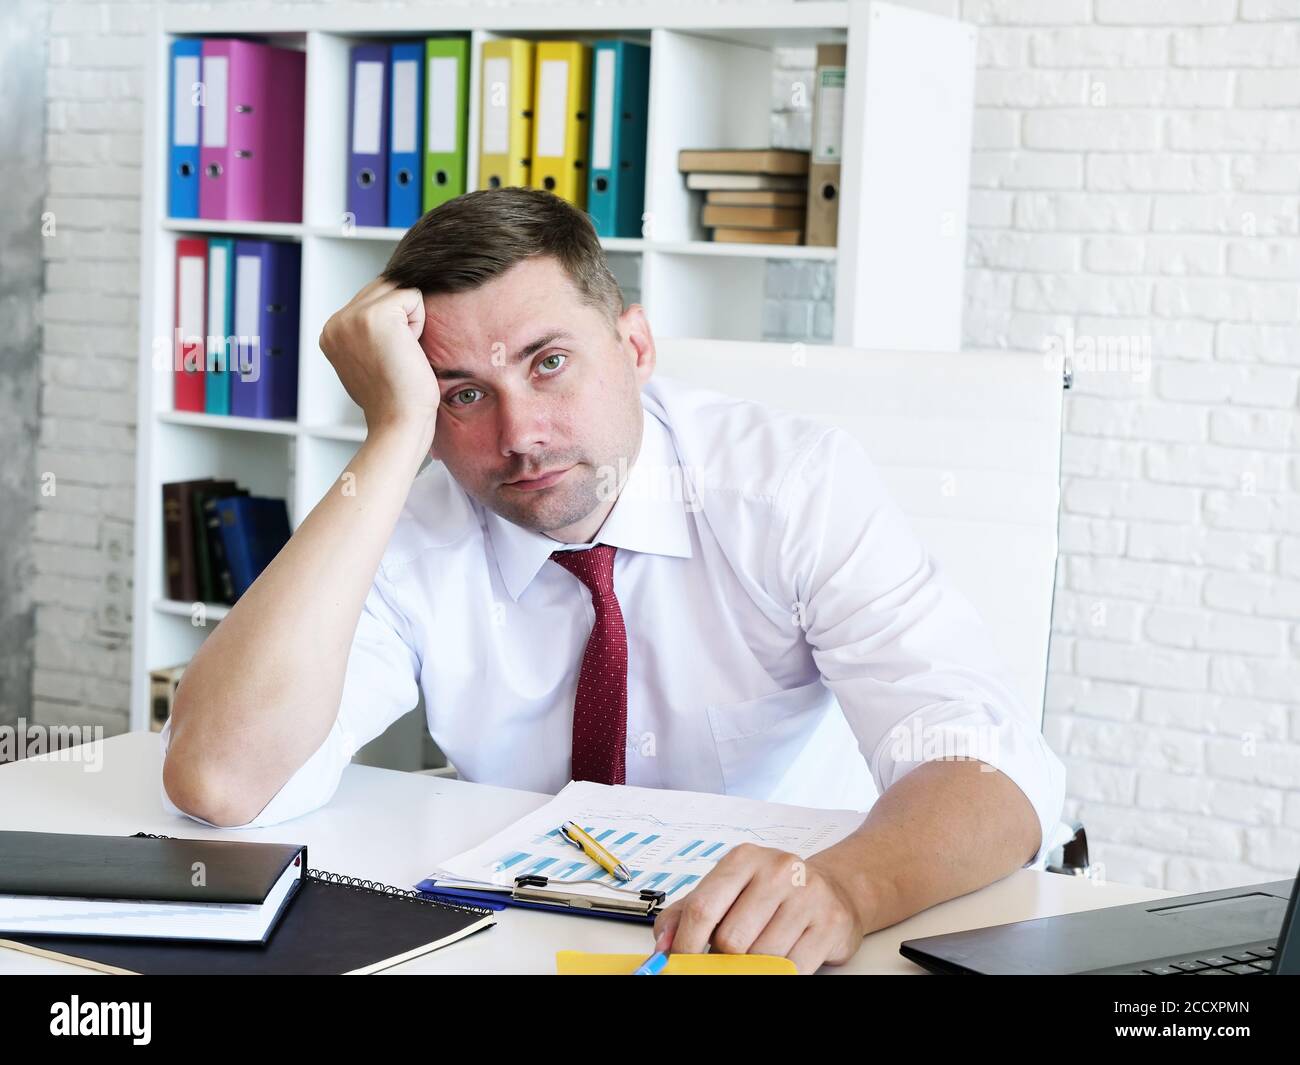 Bankruptcy and business problems. Portrait of a tired businessman. Stock Photo